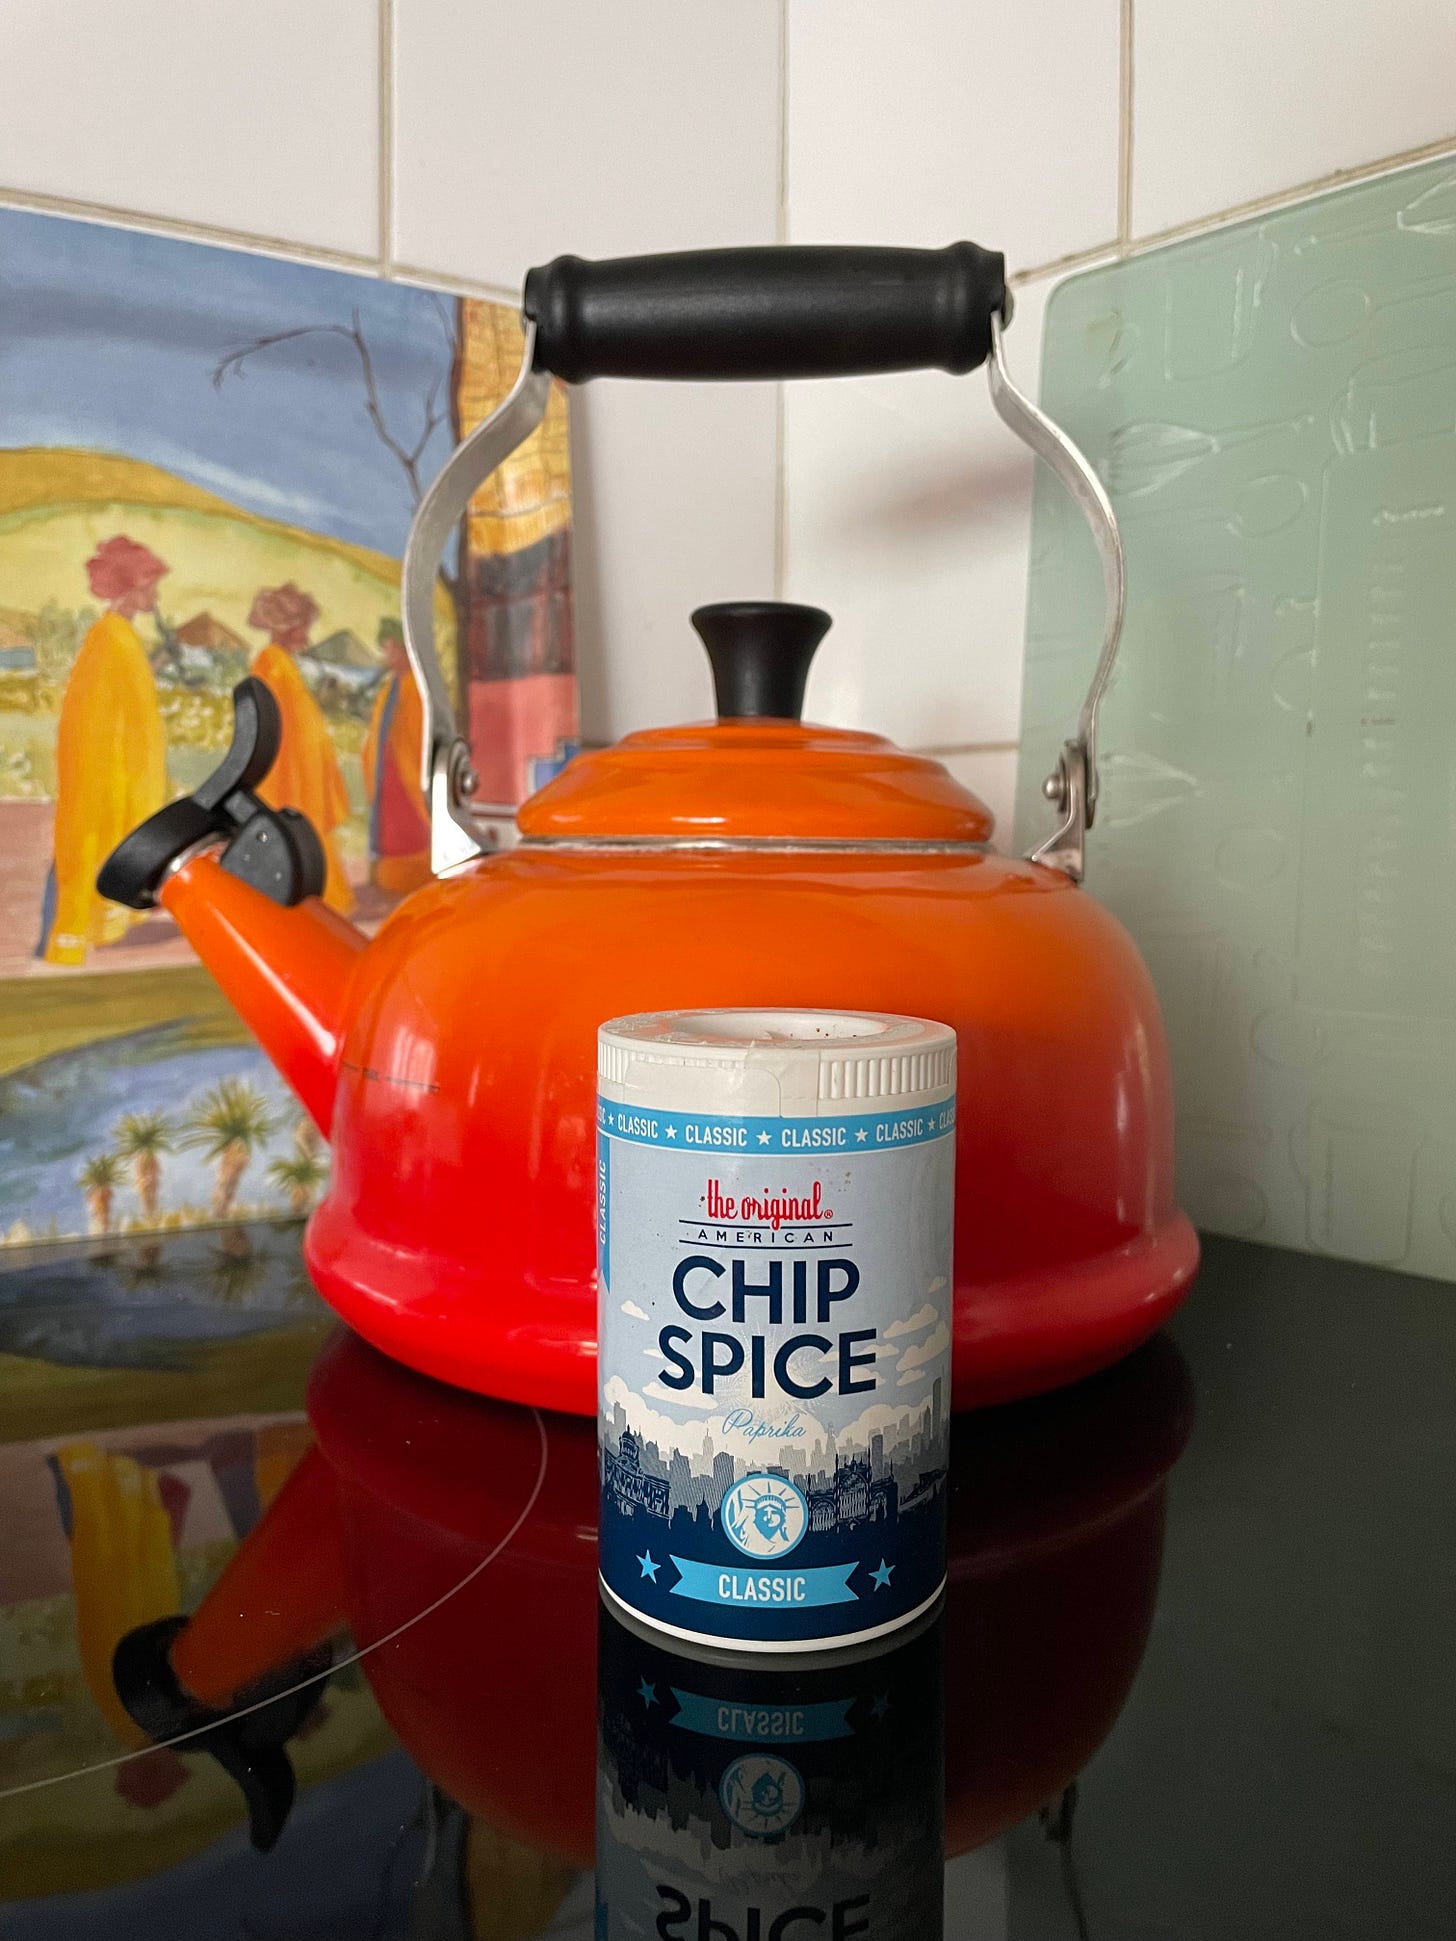 Colour photo showing an orange whistle kettle in the background and a jar of The Original American Chip Spice